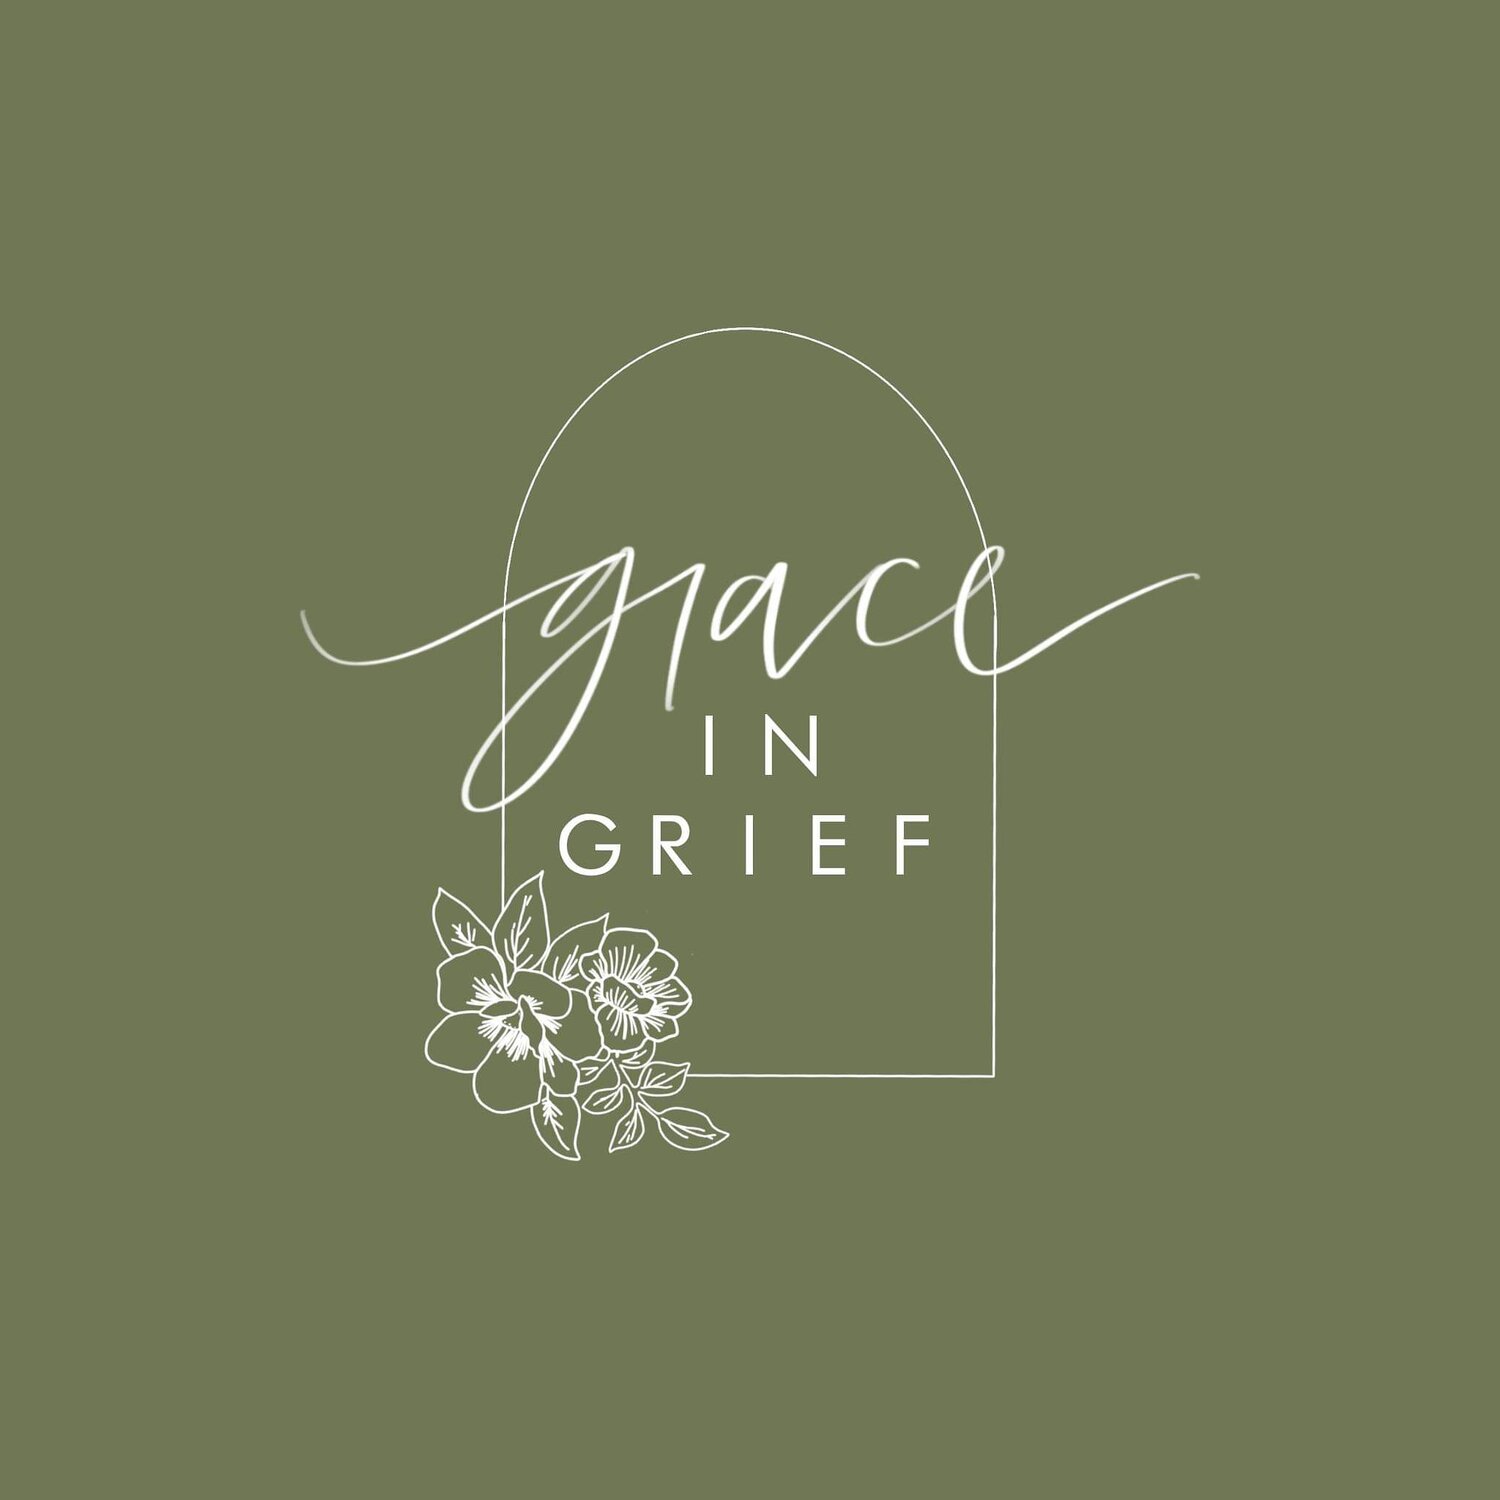 Grace in Grief